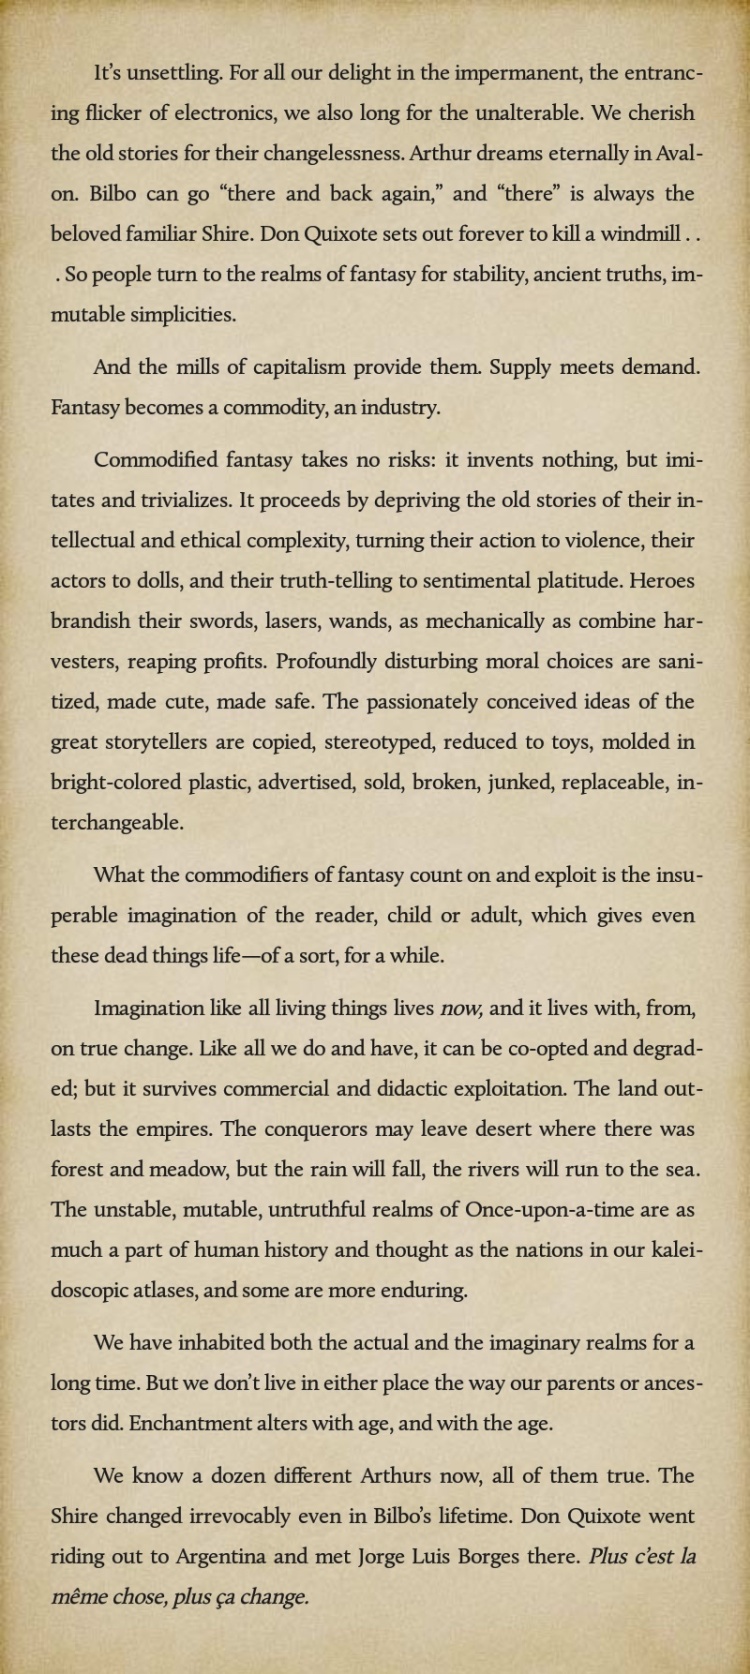 image displays the following 7 paragraphs of text:   It's unsettling. For all our delight in the impermanent, the entrancing flicker of electronics, we also long for the unalterable. We cherish the old stories for their changelessness. Arthur dreams eternally in Avalon. Bilbo can go “there and back again,” and “there” is always the beloved familiar Shire. Don Quixote sets out forever to kill a windmill . . . So people turn to the realms of fantasy for stability, ancient truths, immutable simplicities.  　　And the mills of capitalism provide them. Supply meets demand. Fantasy becomes a commodity, an industry.  　　Commodified fantasy takes no risks: it invents nothing, but imitates and trivializes. It proceeds by depriving the old stories of their intellectual and ethical complexity, turning their action to violence, their actors to dolls, and their truth-telling to sentimental platitude. Heroes brandish their swords, lasers, wands, as mechanically as combine harvesters, reaping profits. Profoundly disturbing moral choices are sanitized, made cute, made safe. The passionately conceived ideas of the great storytellers are copied, stereotyped, reduced to toys, molded in bright-colored plastic, advertised, sold, broken, junked, replaceable, interchangeable.  　　What the commodifiers of fantasy count on and exploit is the insuperable imagination of the reader, child or adult, which gives even these dead things life—of a sort, for a while.  　　Imagination like all living things lives now, and it lives with, from, on true change. Like all we do and have, it can be co-opted and degraded; but it survives commercial and didactic exploitation. The land outlasts the empires. The conquerors may leave desert where there was forest and meadow, but the rain will fall, the rivers will run to the sea. The unstable, mutable, untruthful realms of Once-upon-a-time are as much a part of human history and thought as the nations in our kaleidoscopic atlases, and some are more enduring.  　　We have inhabited both the actual and the imaginary realms for a long time. But we don’t live in either place the way our parents or ancestors did. Enchantment alters with age, and with the age.  　　We know a dozen different Arthurs now, all of them true. The Shire changed irrevocably even in Bilbo’s lifetime. Don Quixote went riding out to Argentina and met Jorge Luis Borges there. Plus c’est la même chose, plus ça change